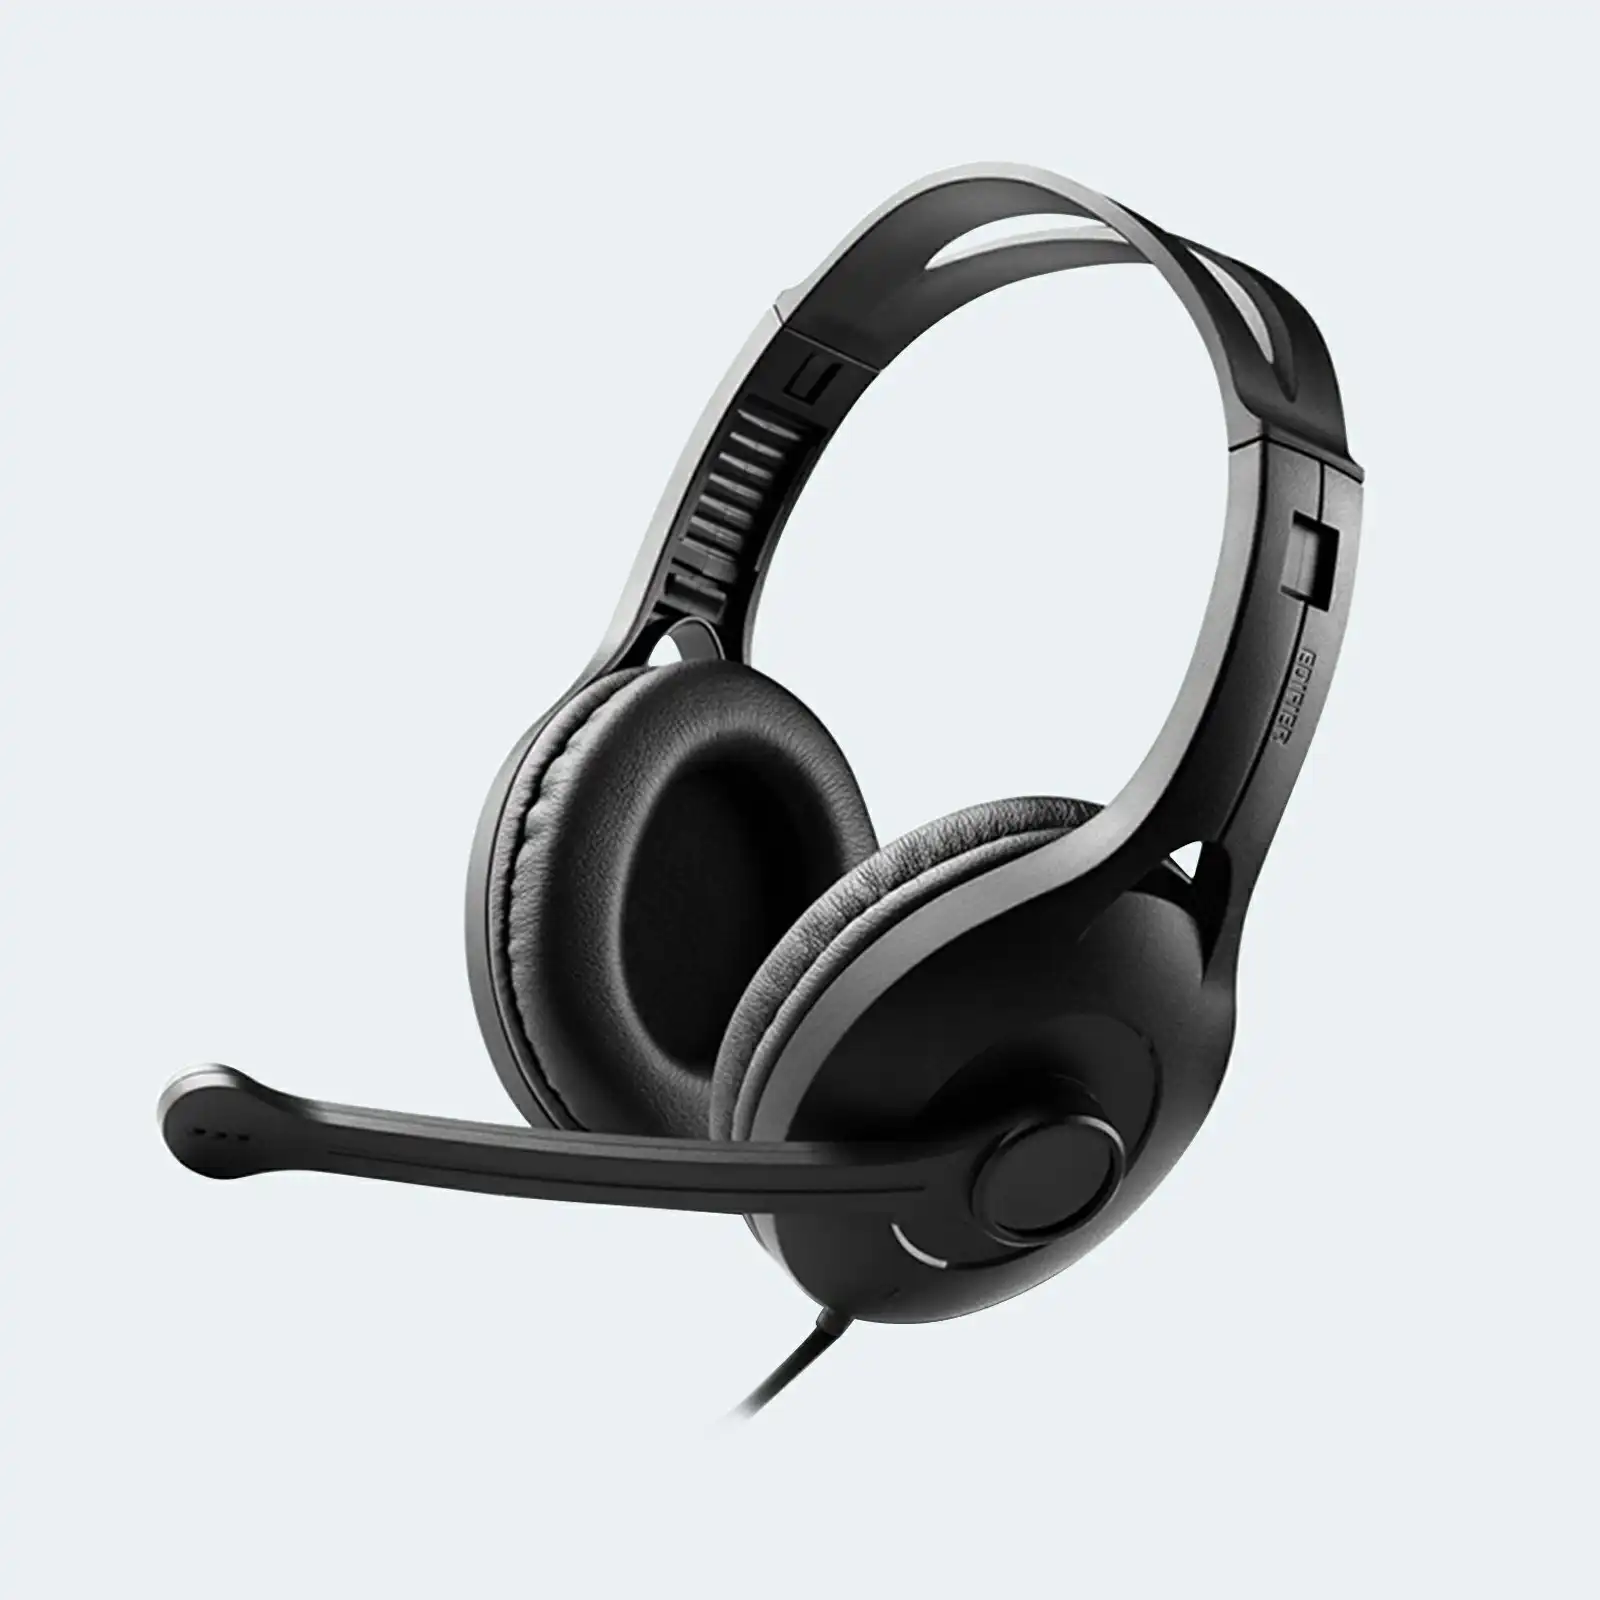 Edifier K800 Usb Headset With Microphone - Black